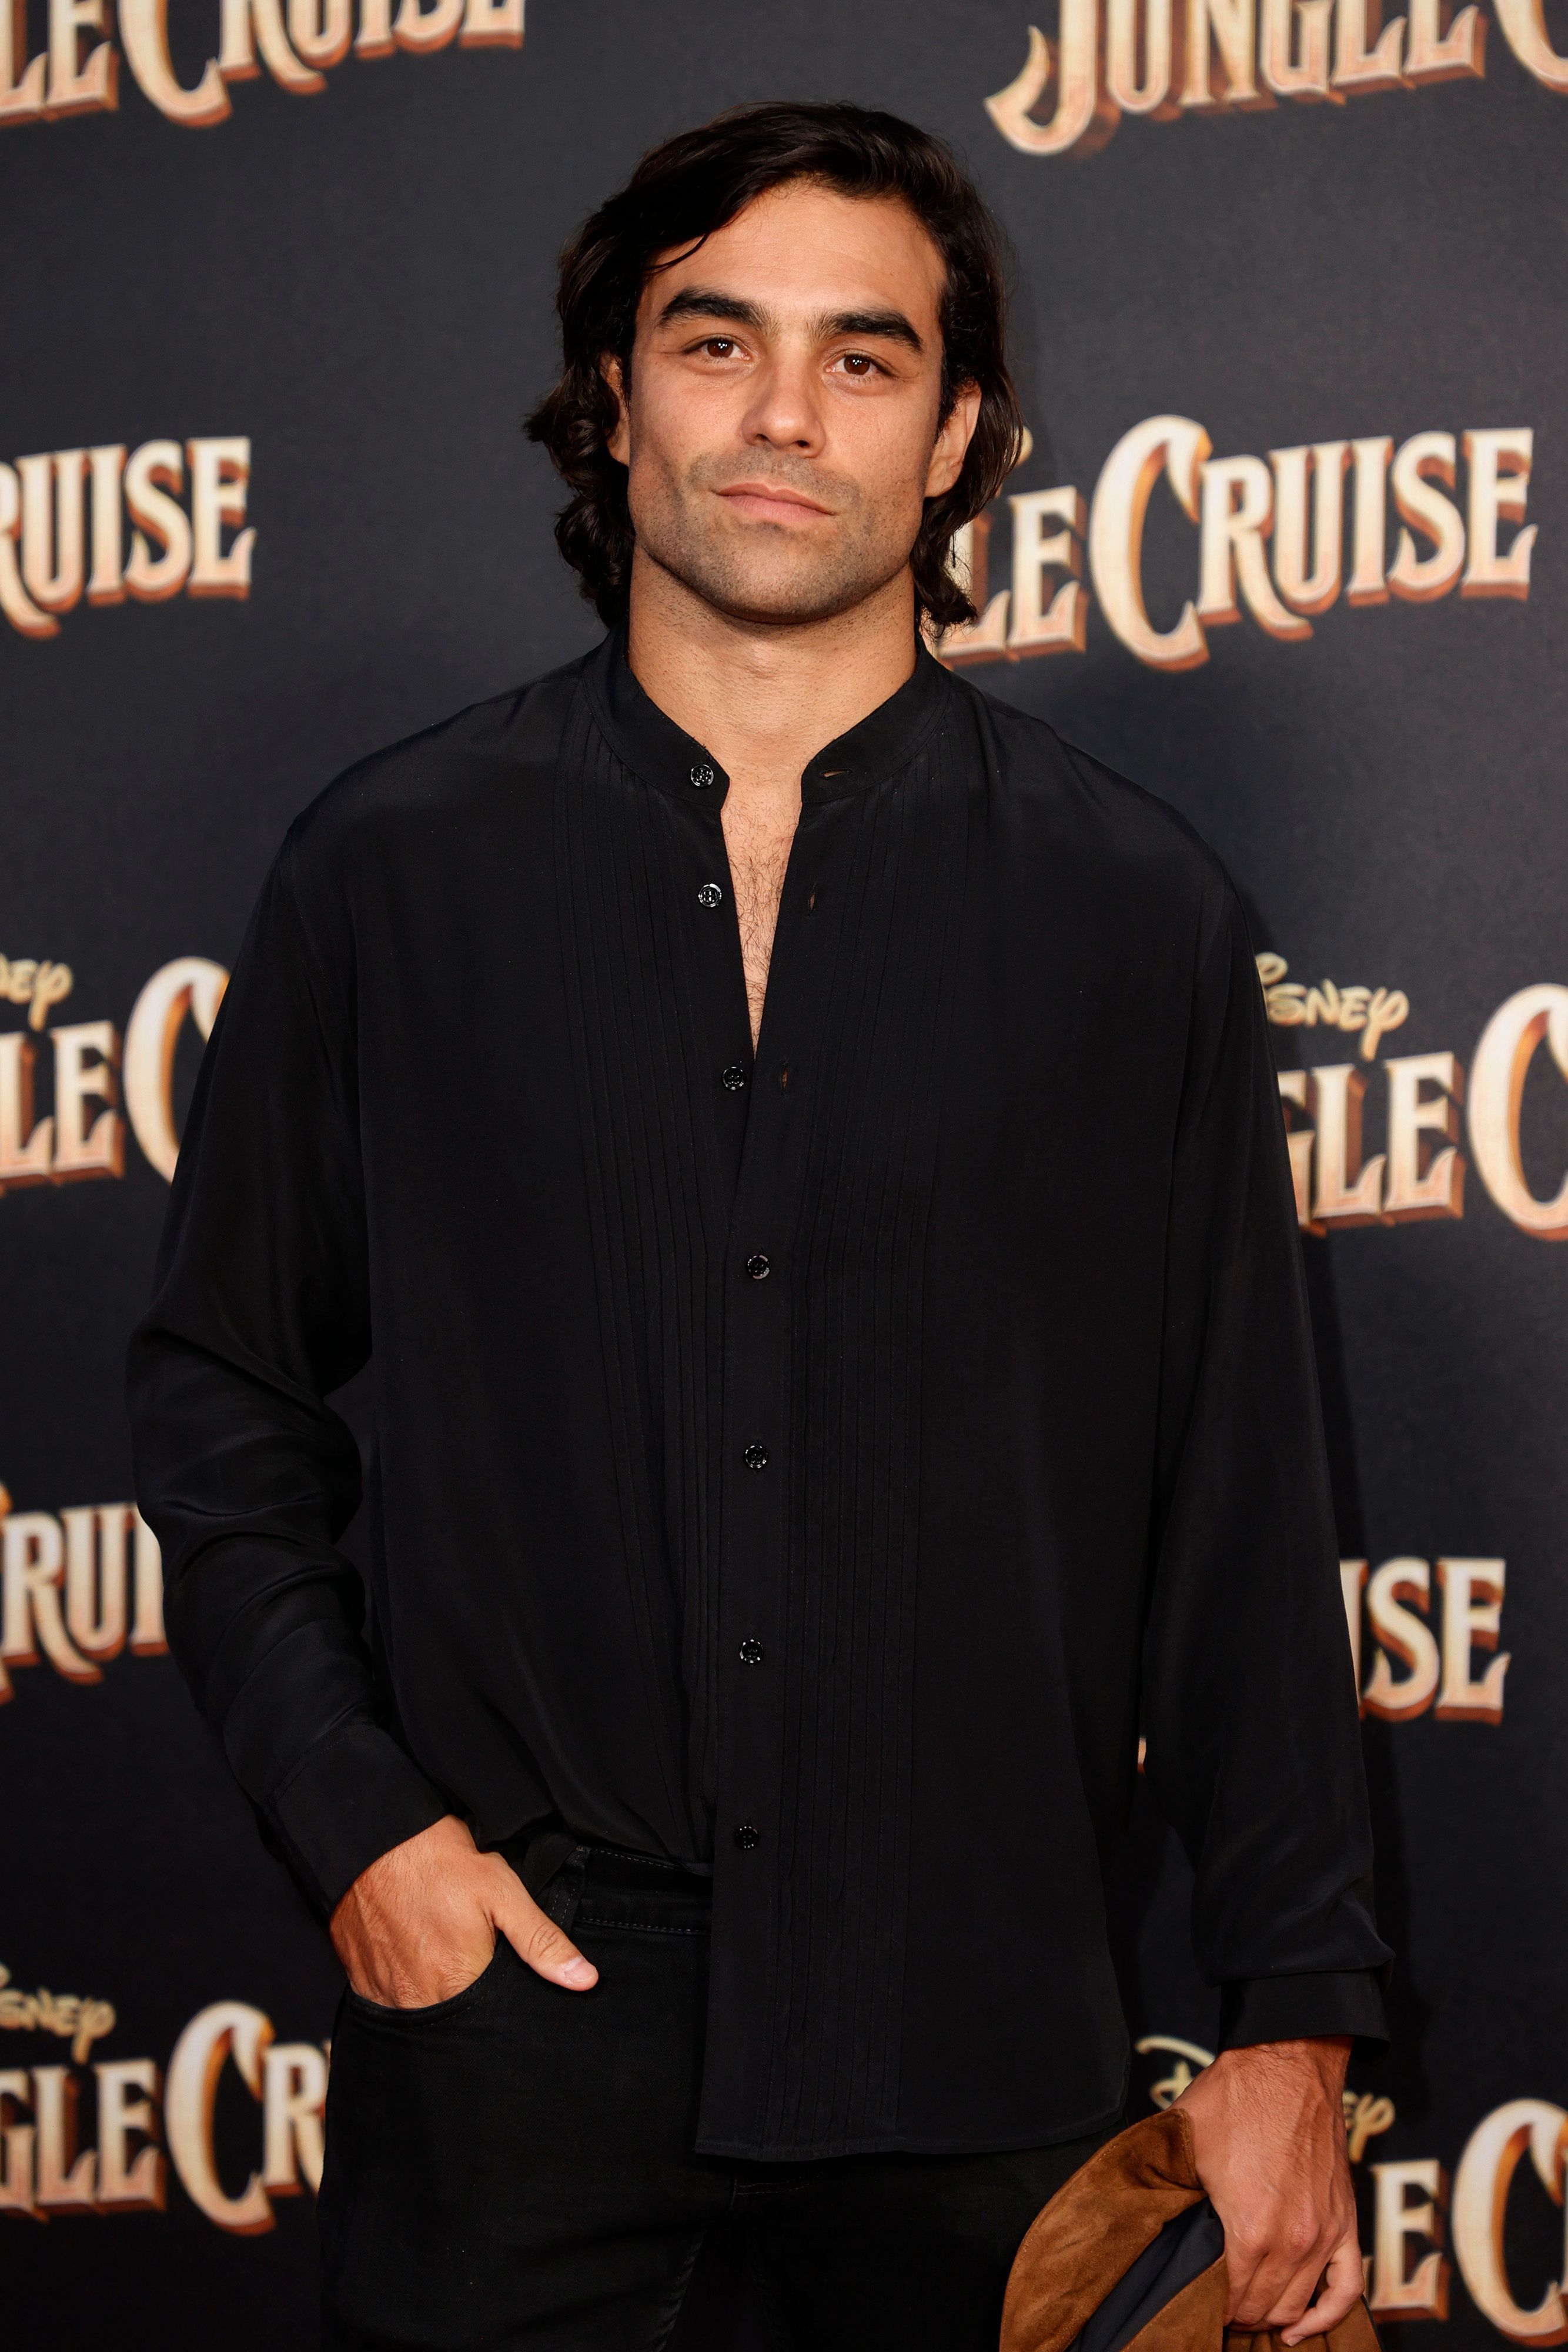 Diego Osorio attends the World Premiere Of Disney's "Jungle Cruise" at Disneyland on July 24, 2021, in Anaheim, California. | Source: Getty Images